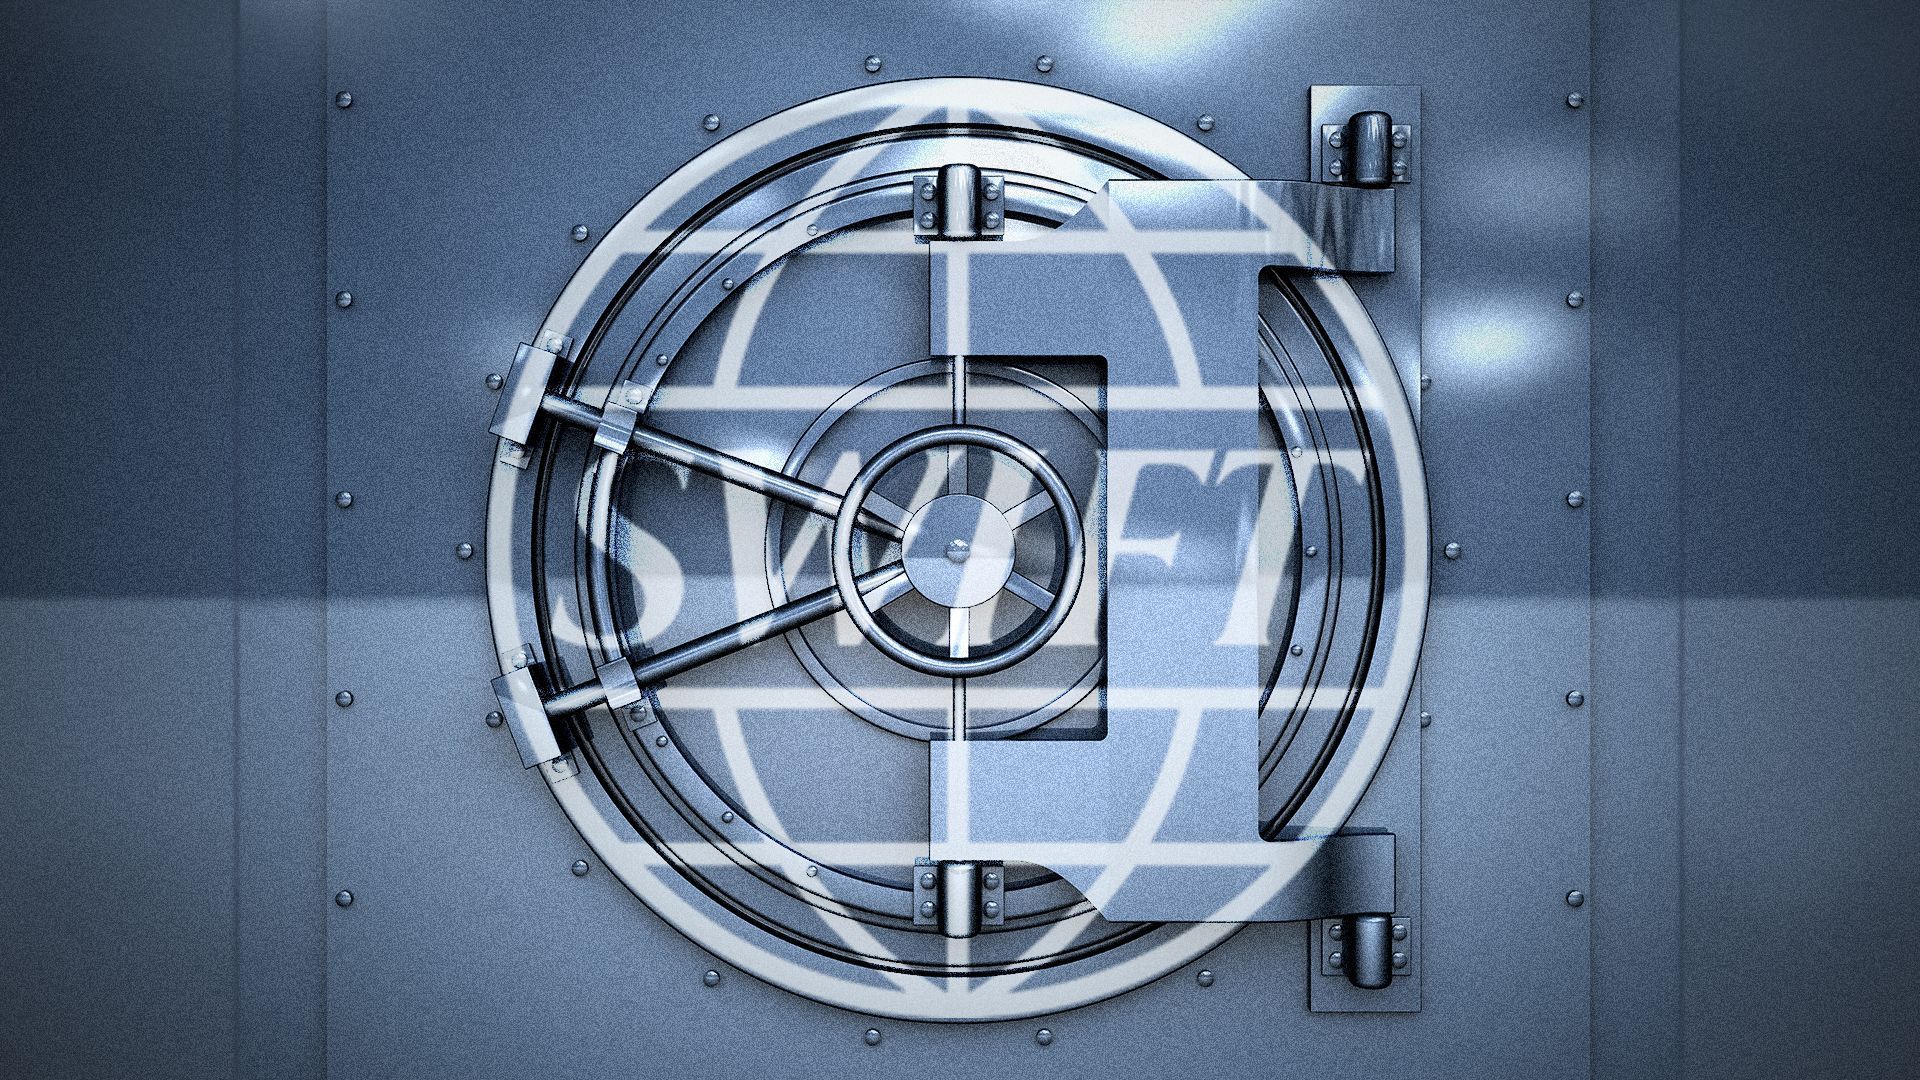  Illustration of a locked bank vault with the SWIFT logo. 